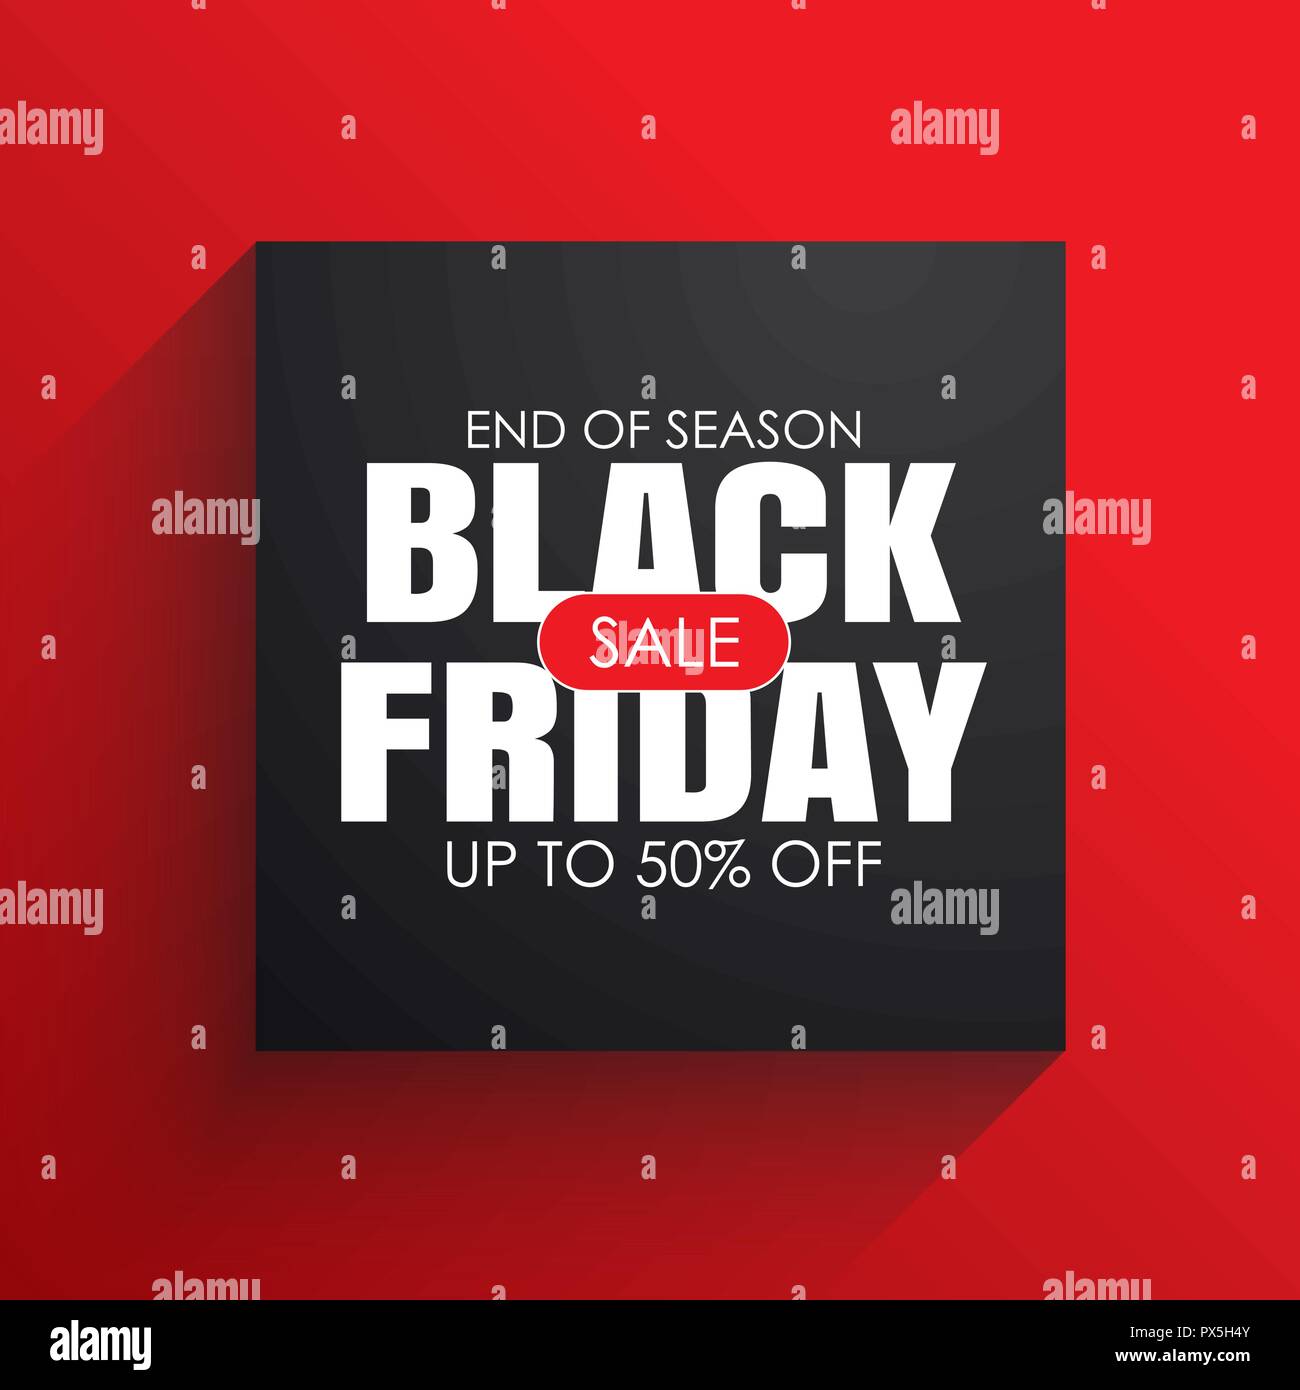 Black friday sale banner with white text on black square background. Use for discount, shopping, promotion, advertising. Stock Vector